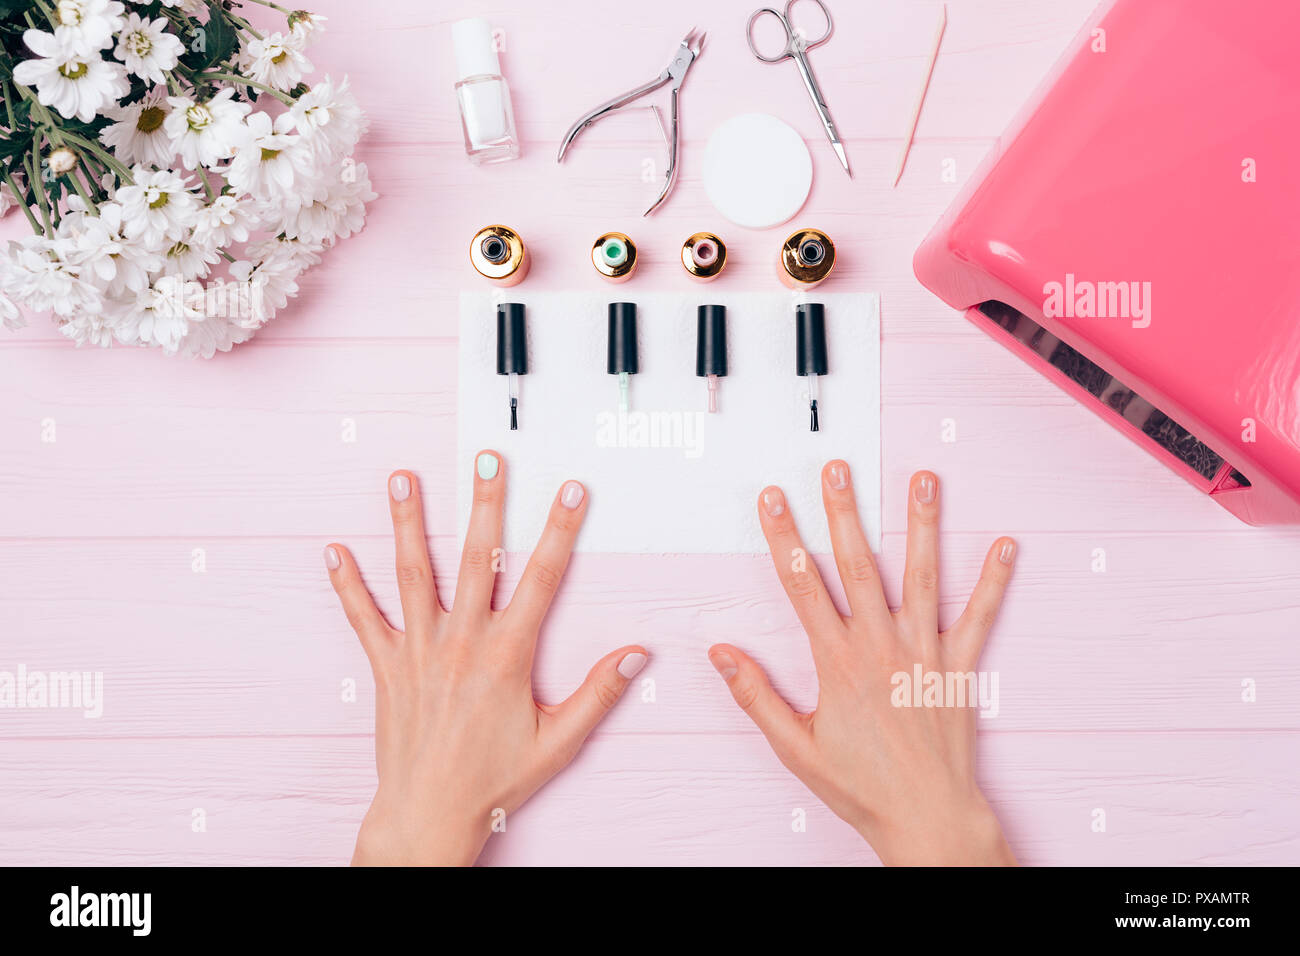 Female hands with shellac covering near opened bottles gel nail polishes, brushes, ultraviolet lamp and bouquet of flowers, top view. Creative flatlay Stock Photo